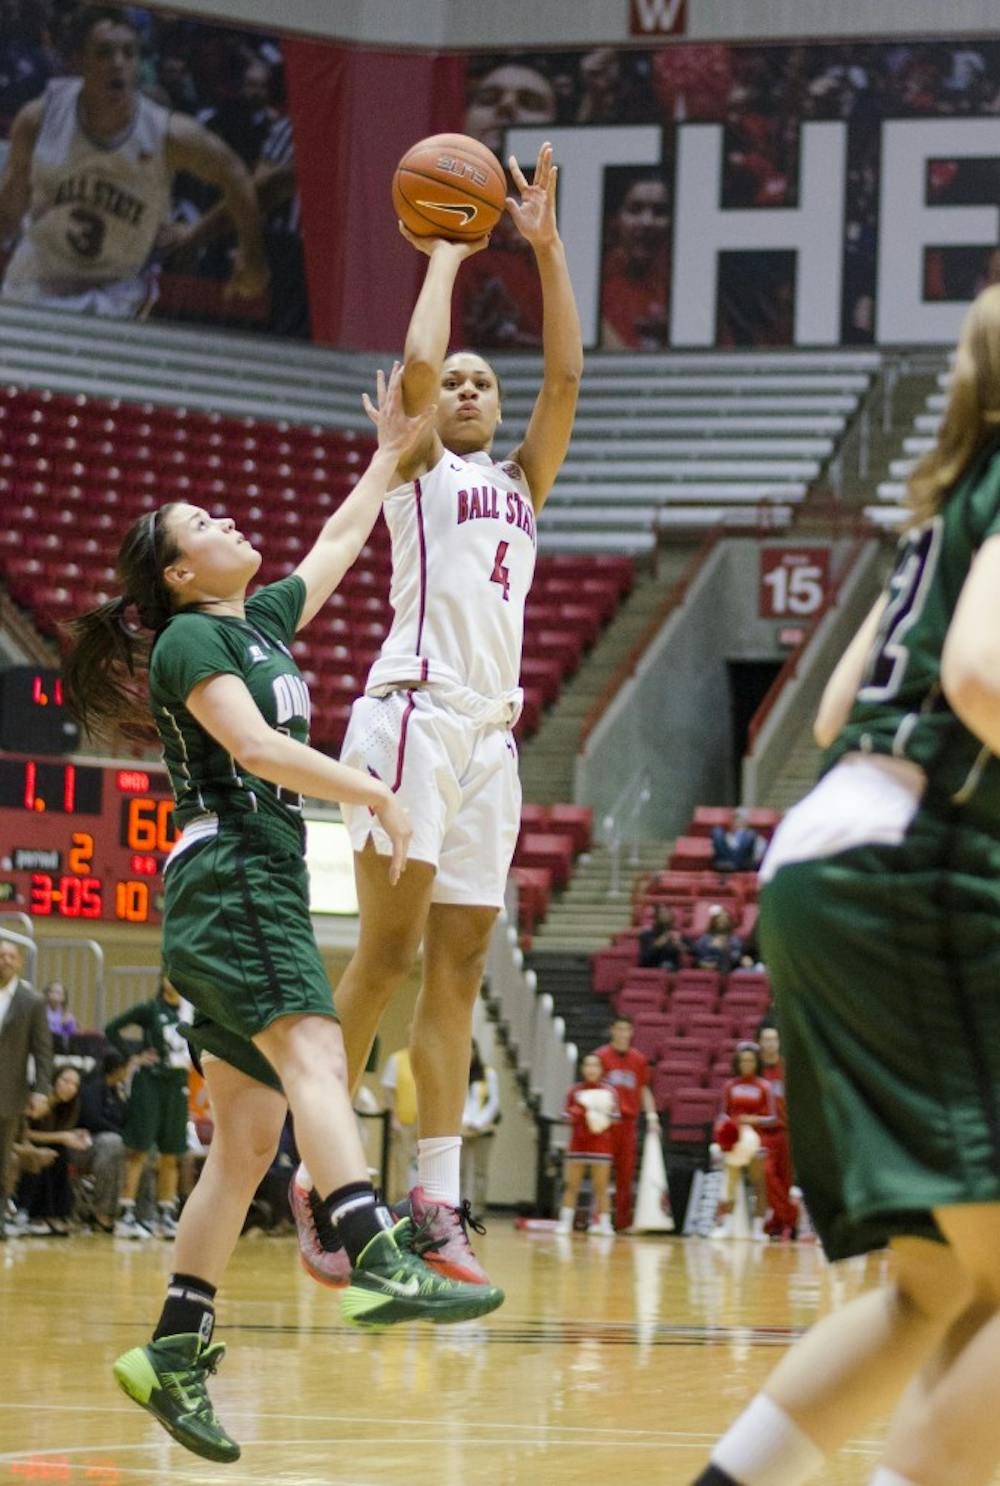 Junior forward Nathalie Fontaine goes up for a shot during the game against Ohio on Jan. 24 at Worthen Arena. DN PHOTO BREANNA DAUGHERTY